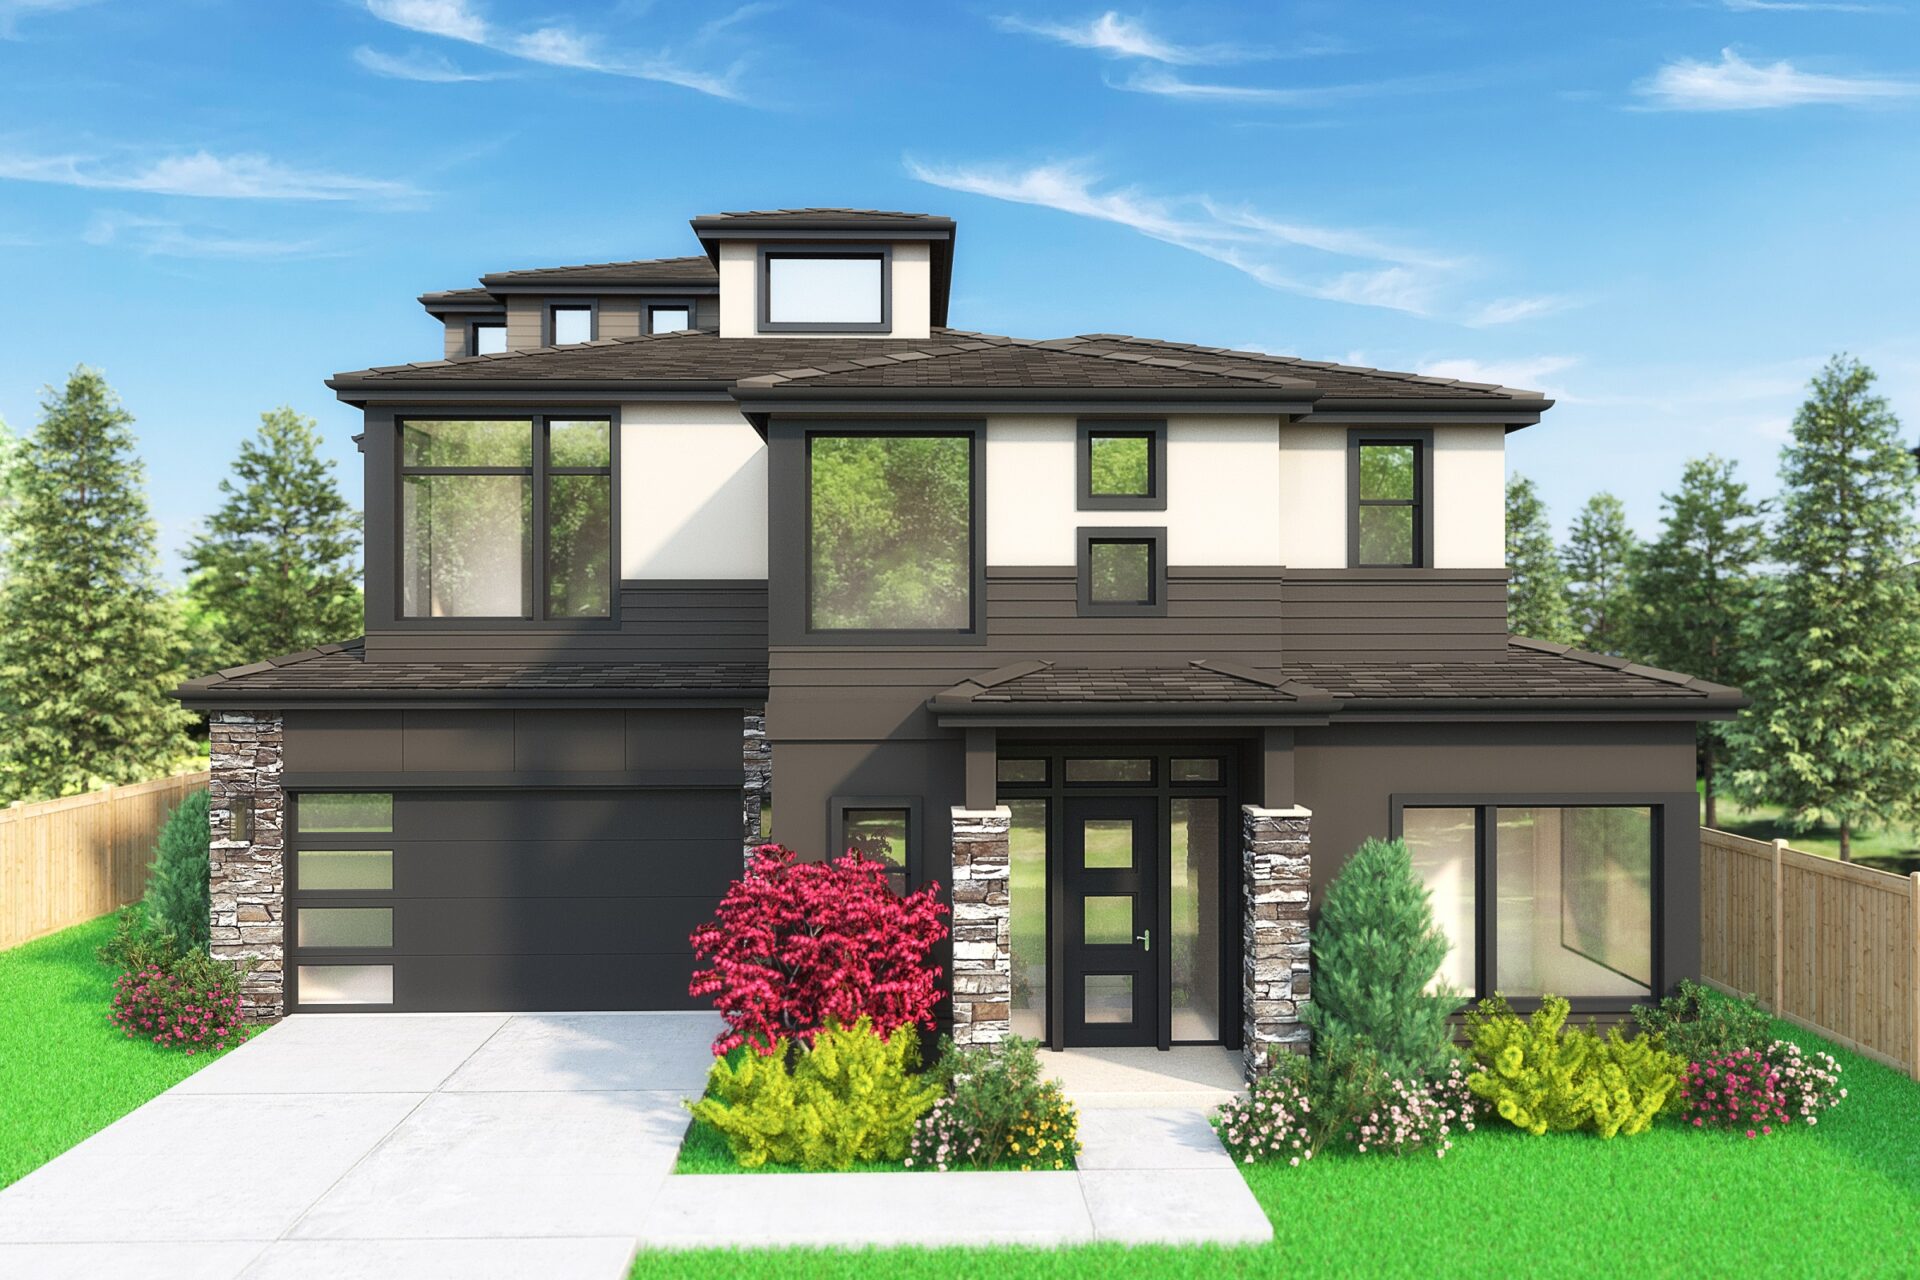 View our new luxury home construction on 12823 SE 7th Pl, in Bellevue, WA from MN Custom Homes